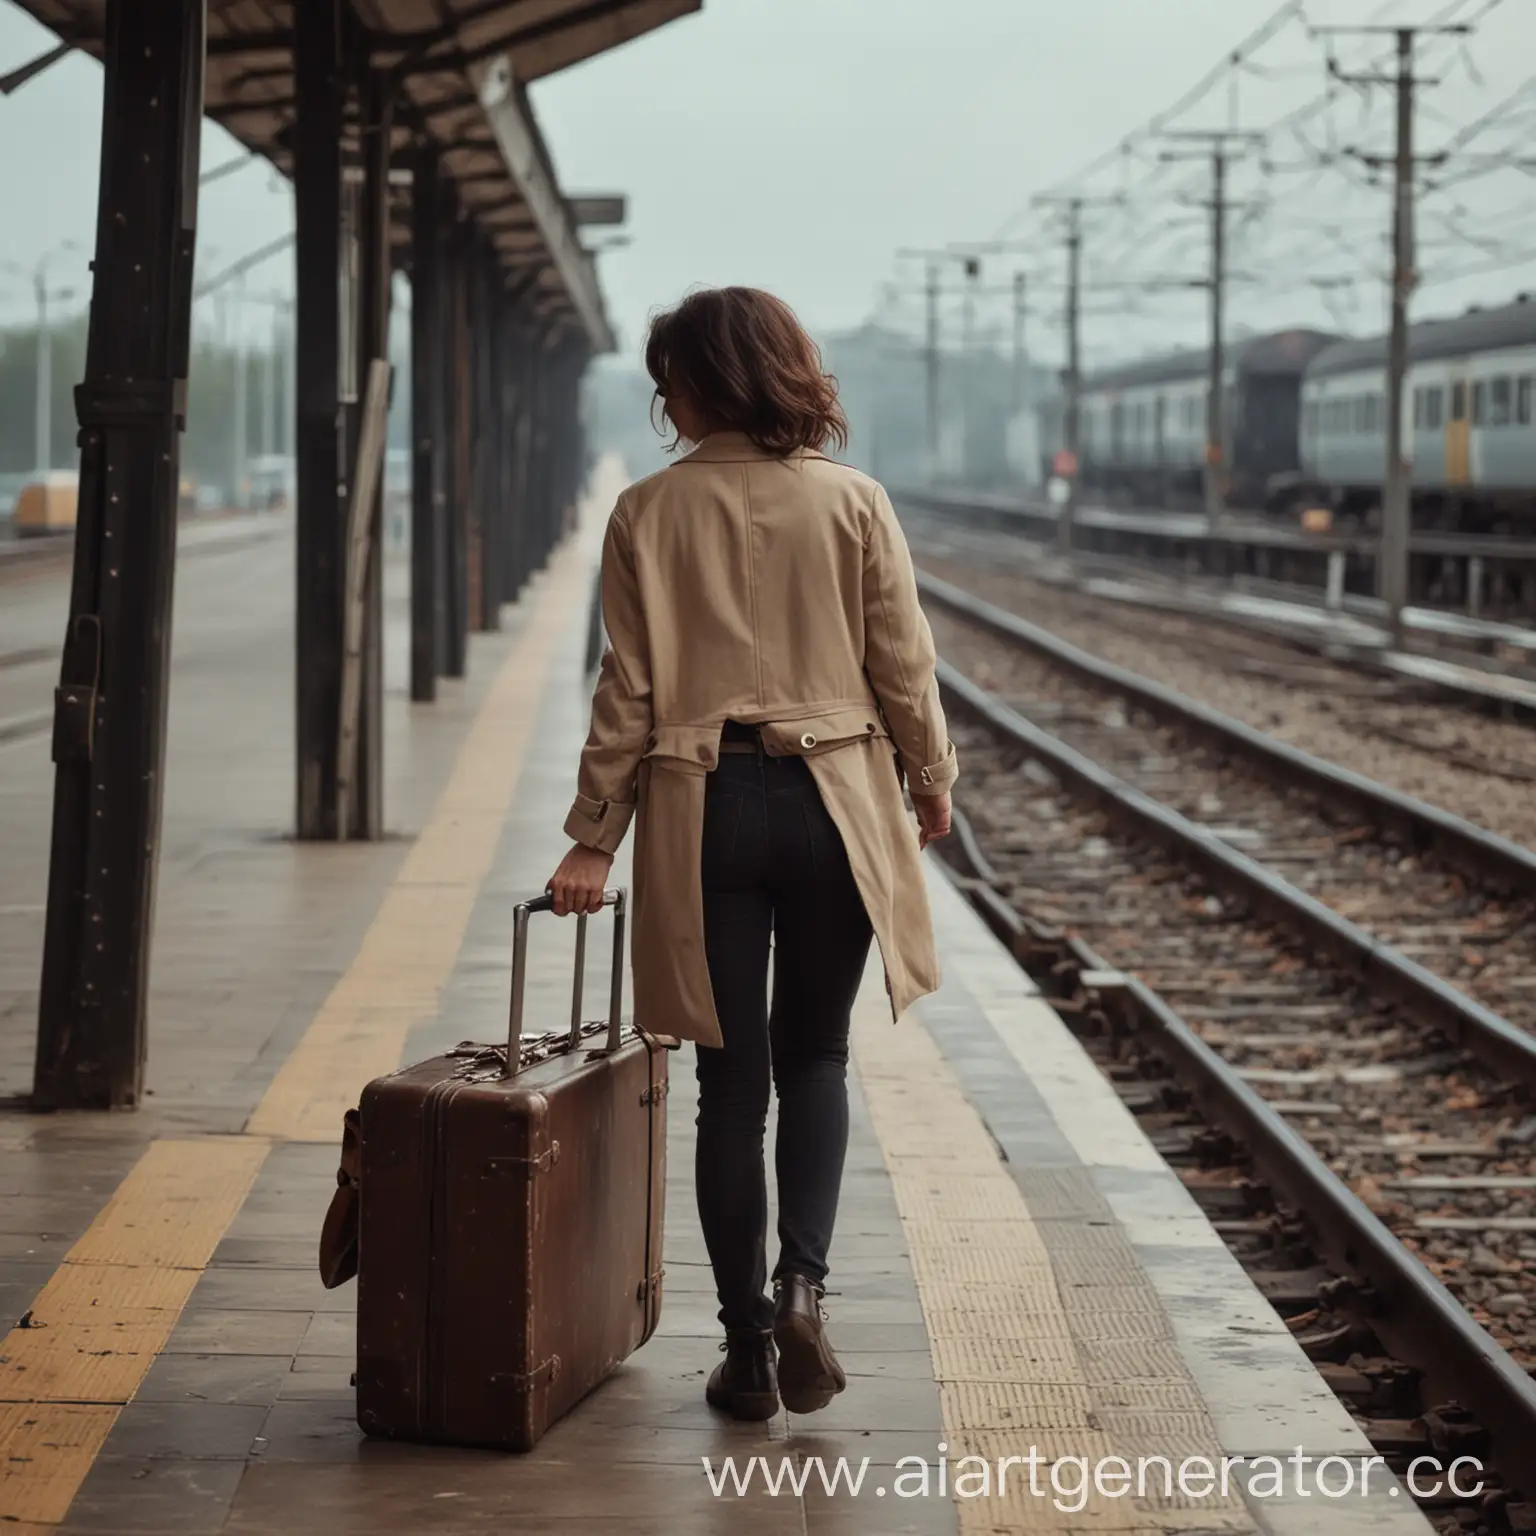 Young-Girl-Walking-with-Suitcase-on-Train-Platform